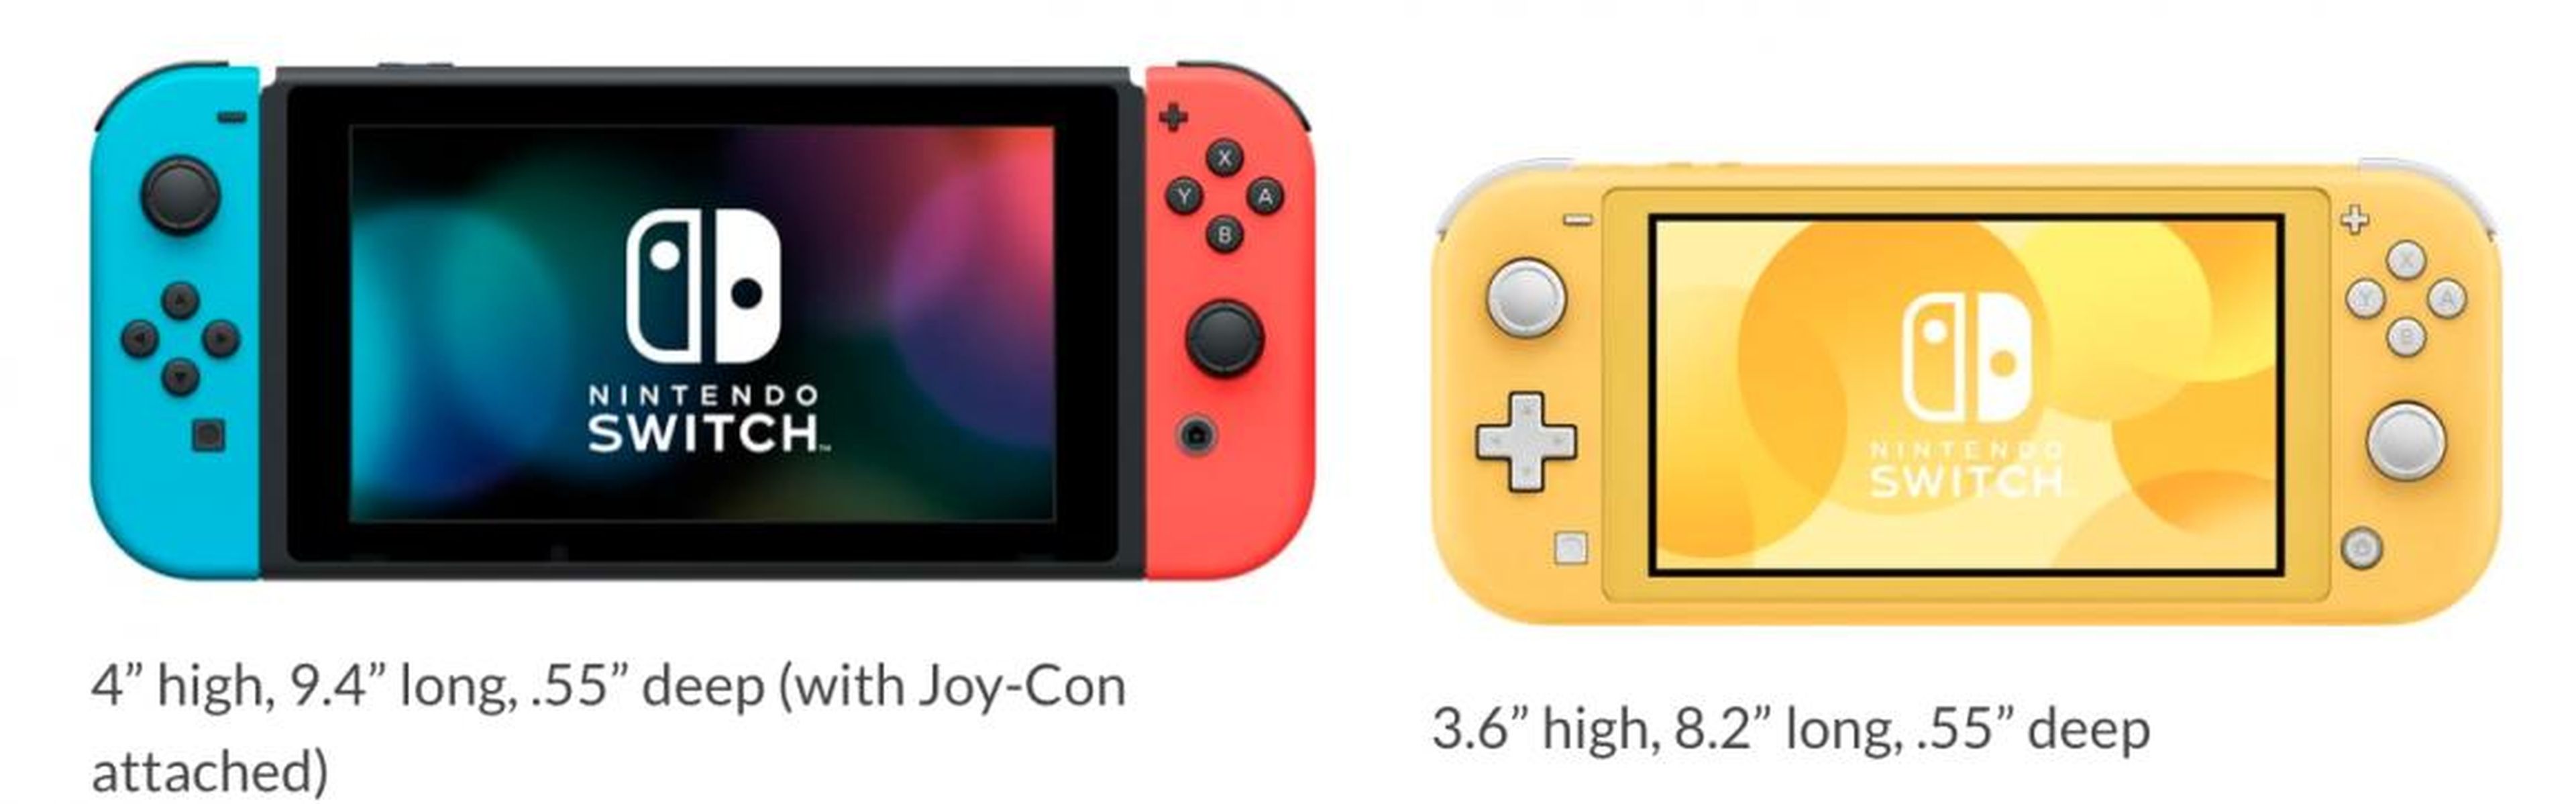 The Switch Lite has a 5.5-inch screen from corner to corner, while the original Switch has a 6.2-inch screen. The Switch Lite has a smaller screen than the smallest iPhone XS, which is 5.8 inches across.